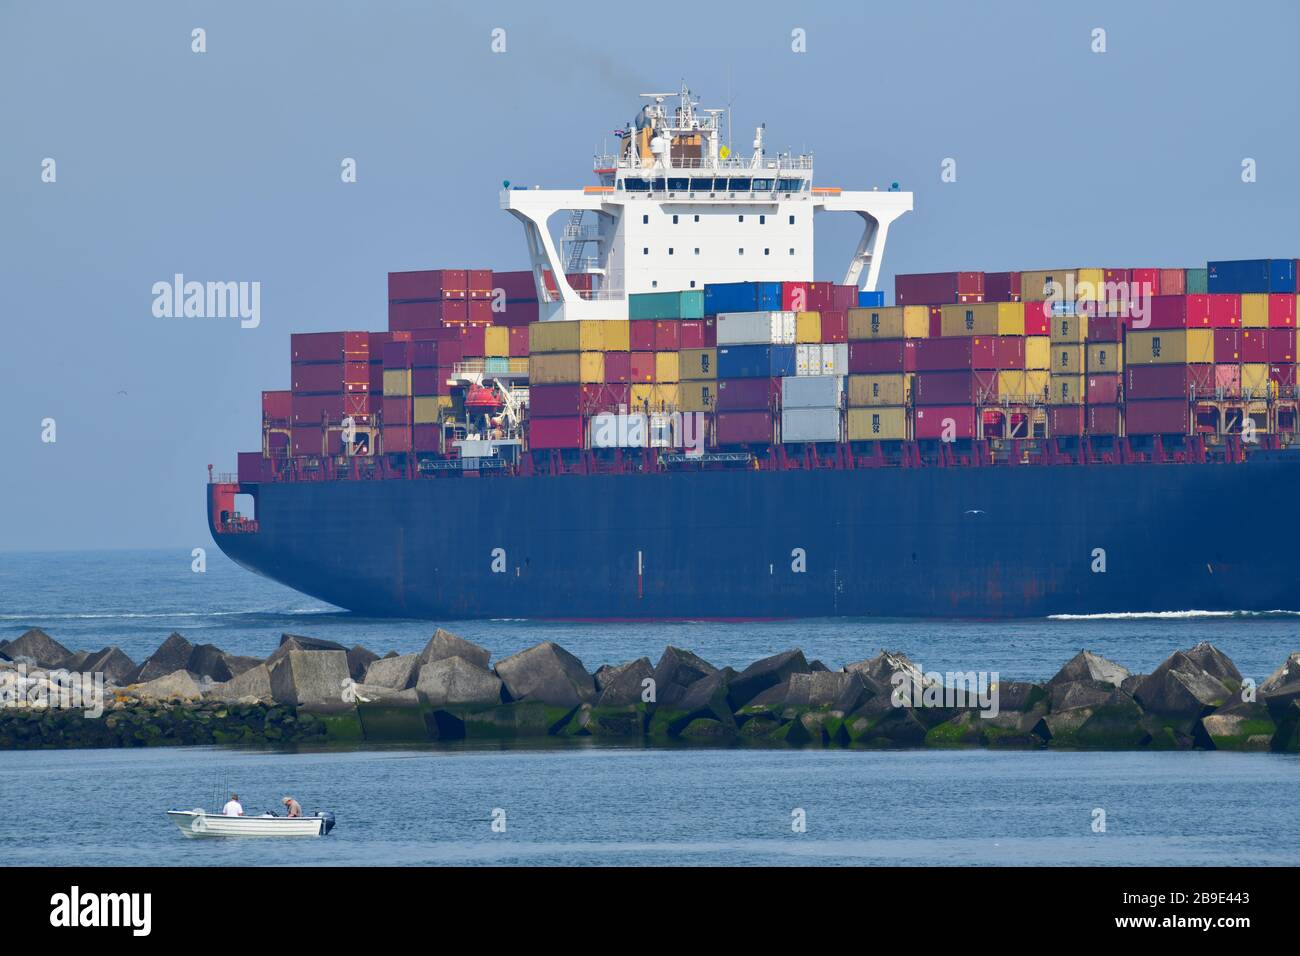 Arrival of large containership in Rotterdam harbor with in the forefront a tiny boat with 2 man fishing that dwarfs in comparison Stock Photo